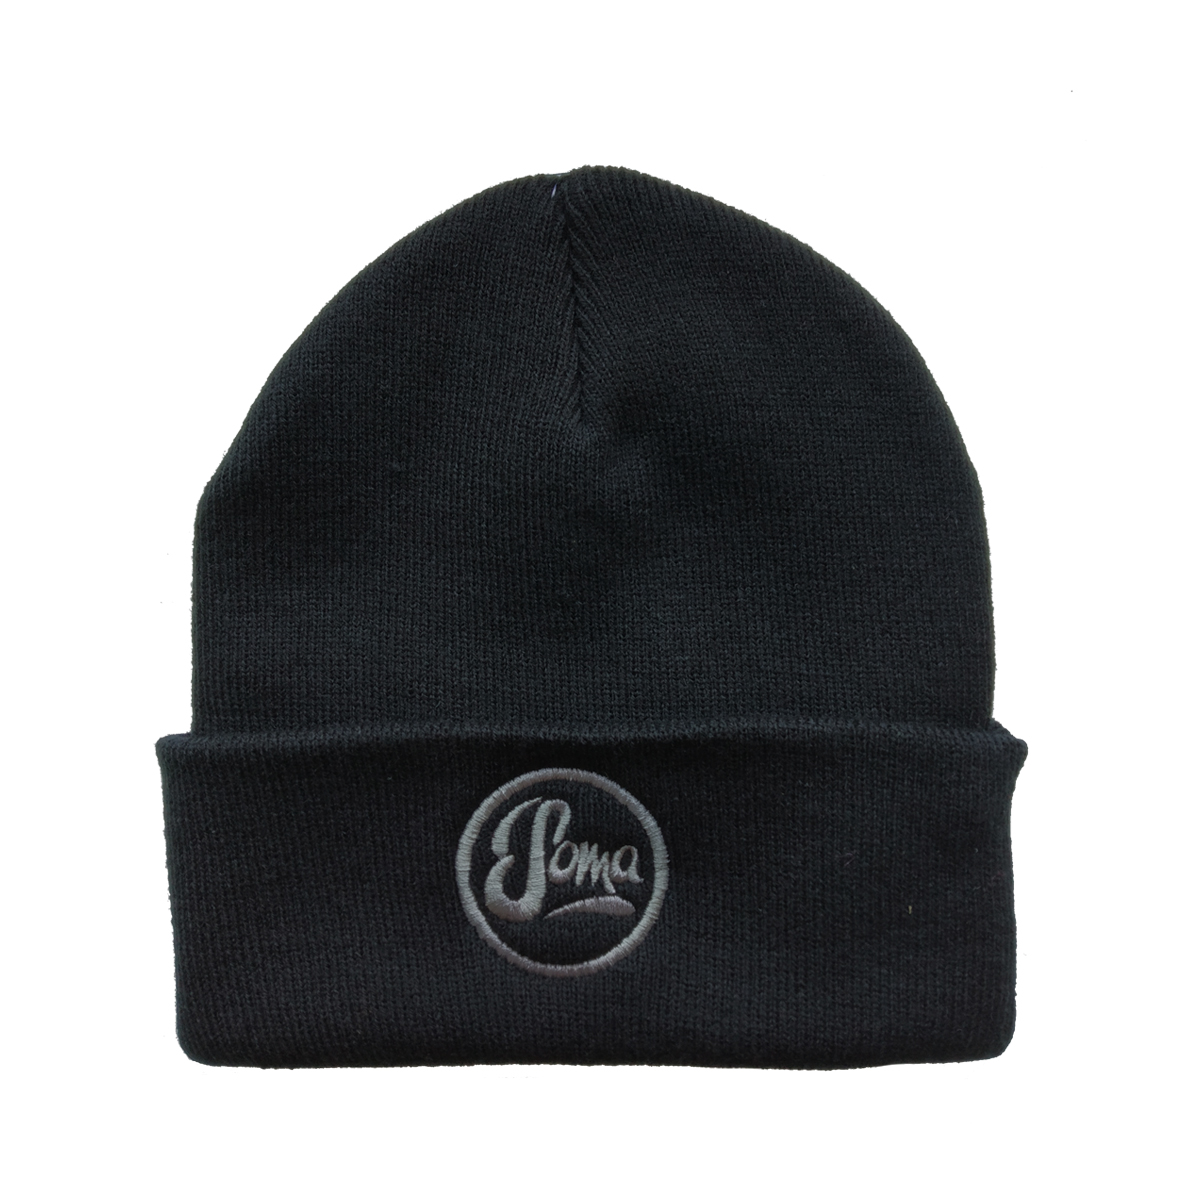 Black Beanie with embroidered logo - £10